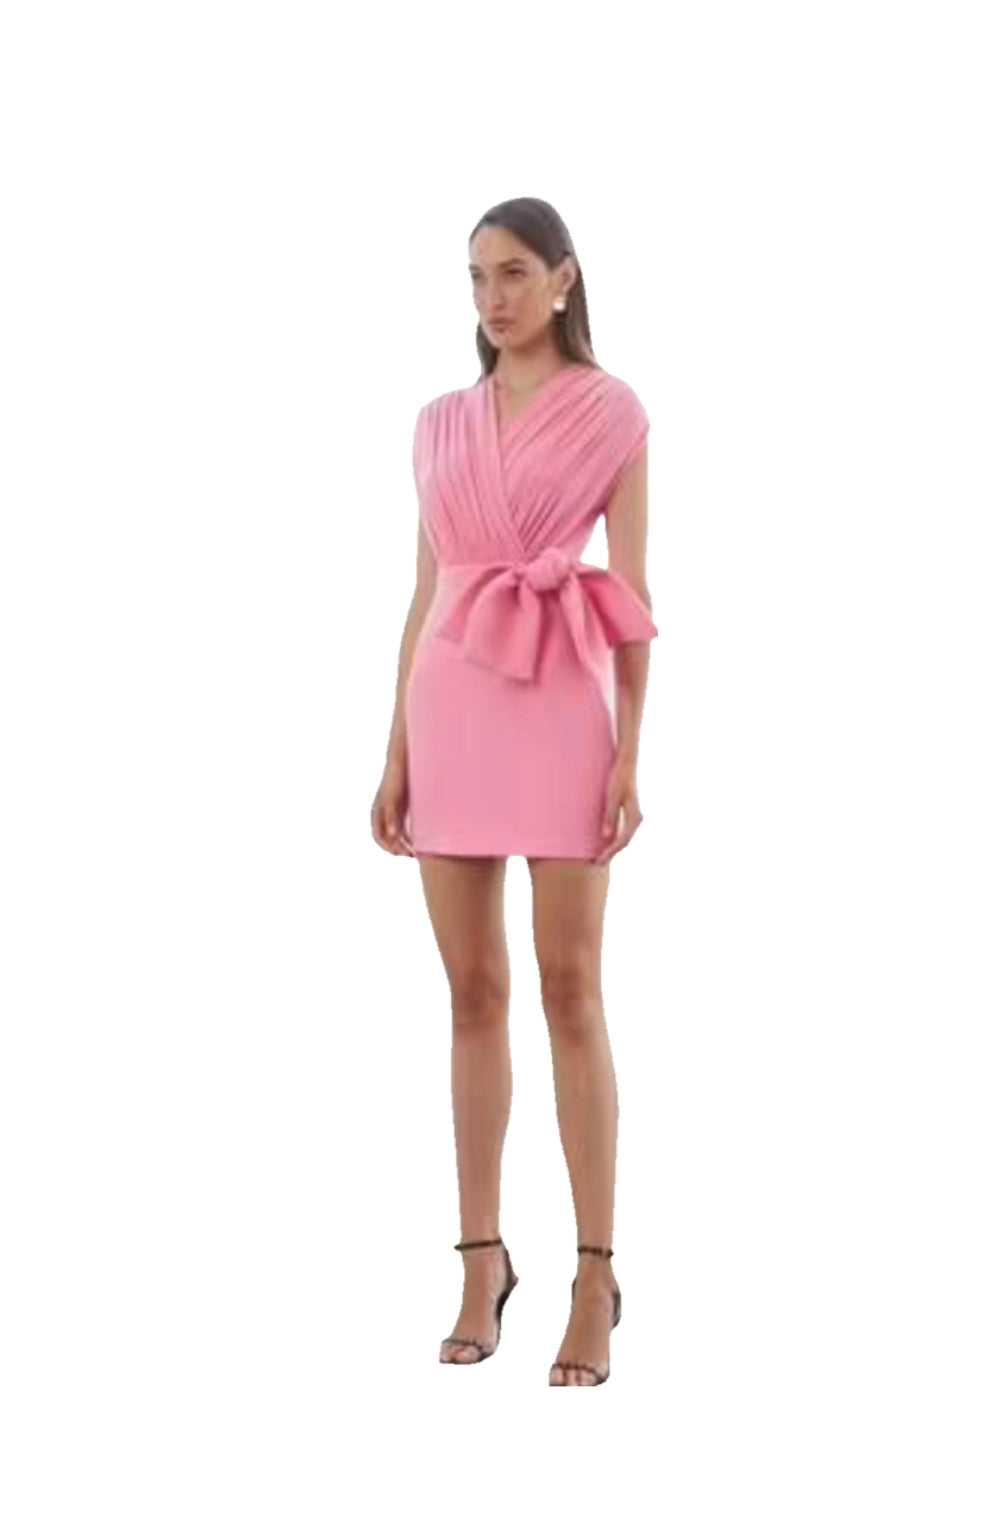 By Johnny designer dress for sale, pink Gloria Bow Drape new with tags. Wide over shoulder with big bow pink mini dress. woman standing wearing black strappy heels